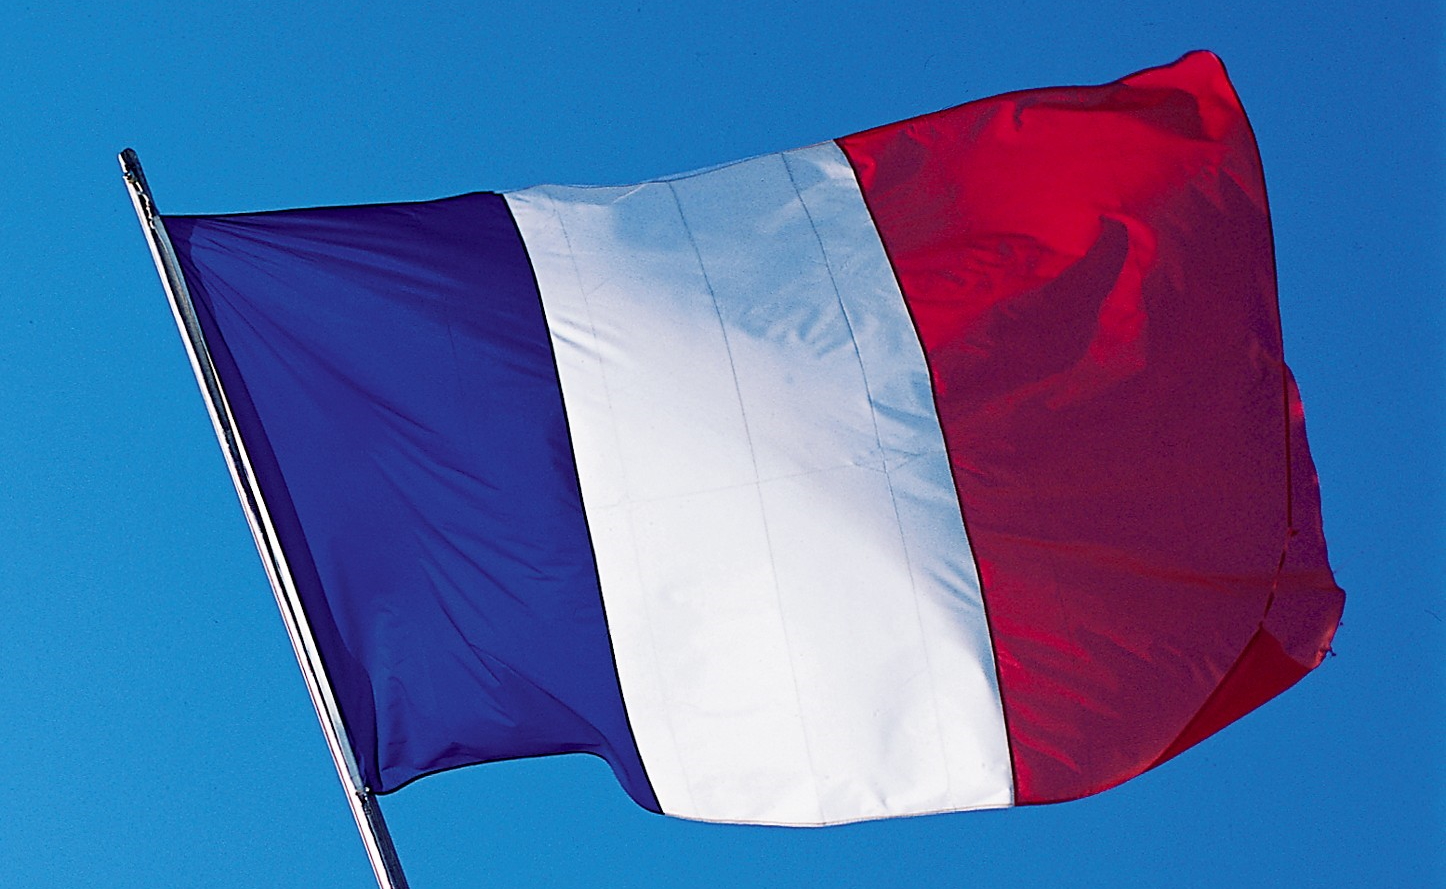 France’s music industry sees music streaming grow in 2020